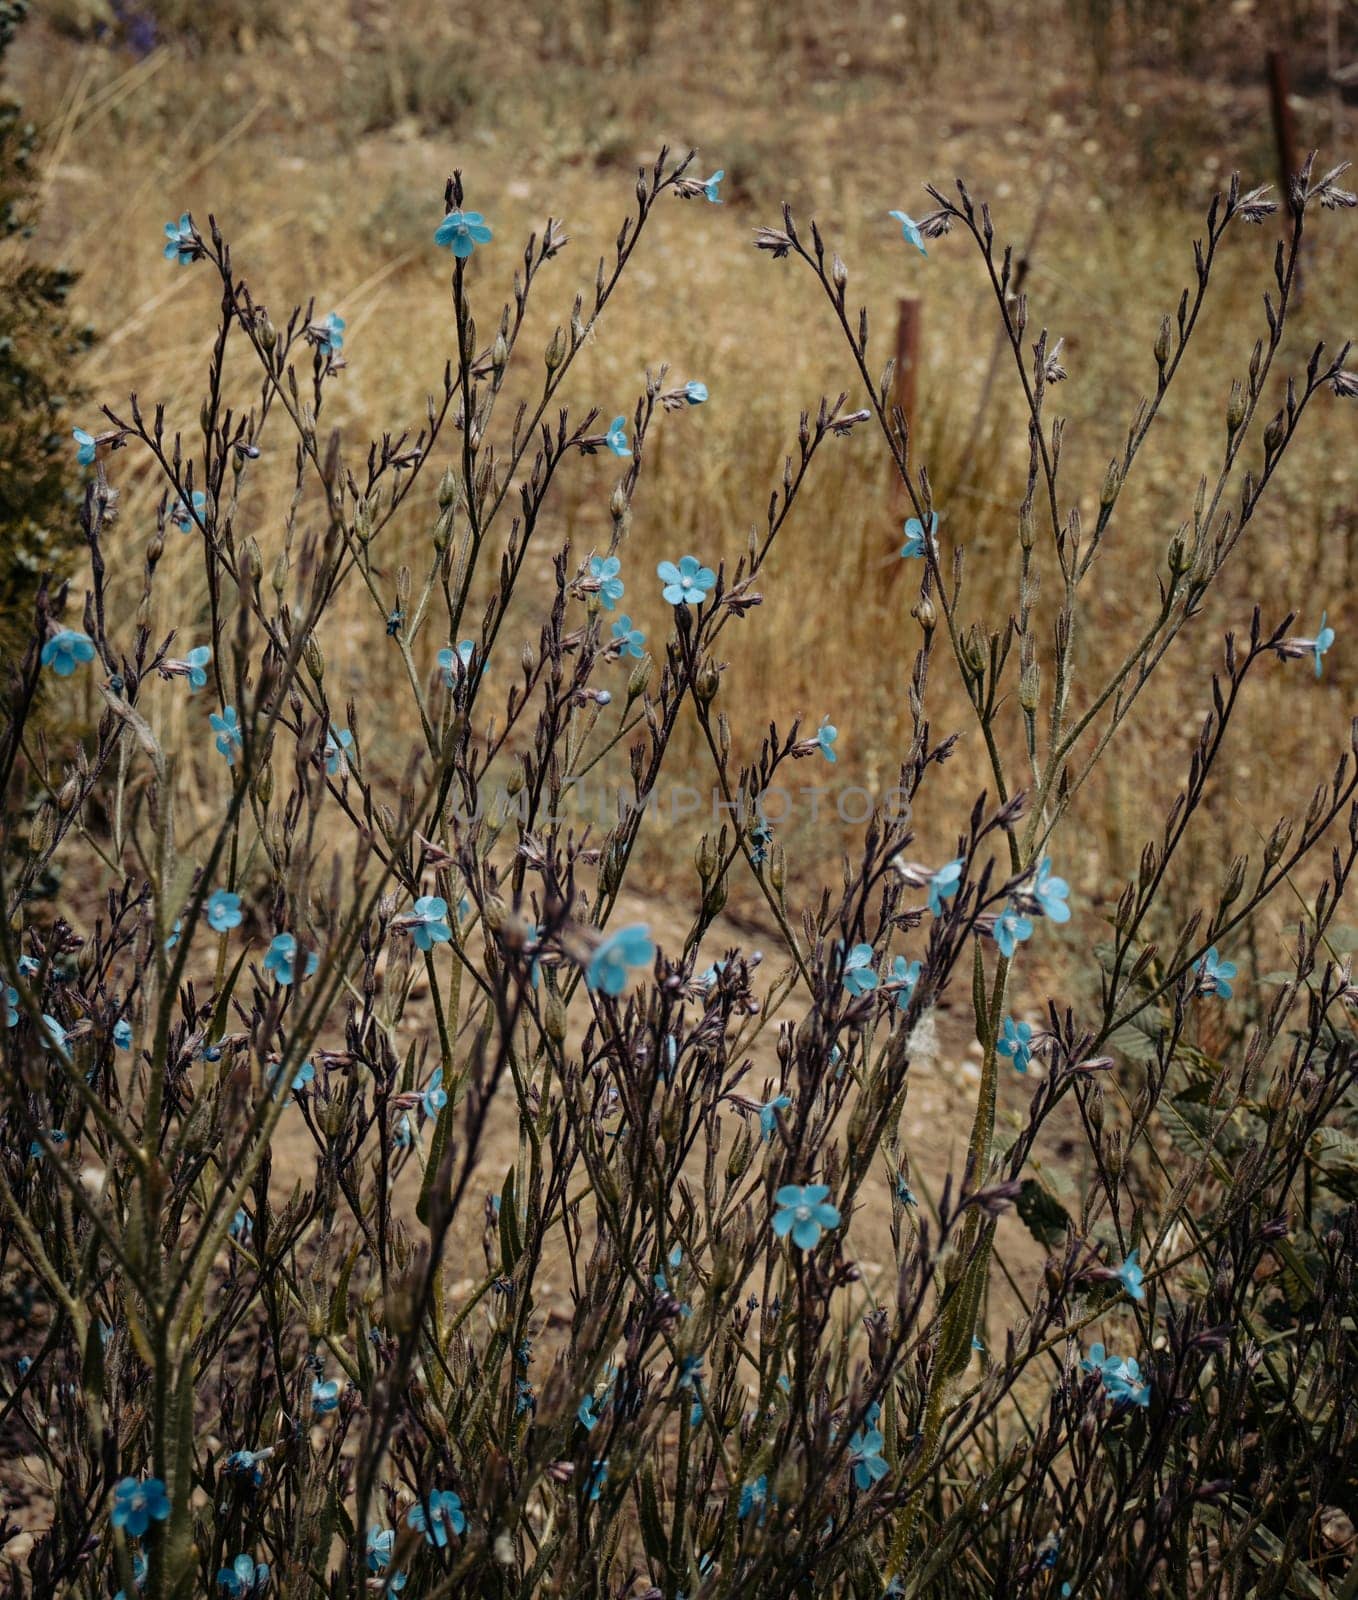 Small blue flax blossom flowers on wild field concept photo. by _Nataly_Nati_